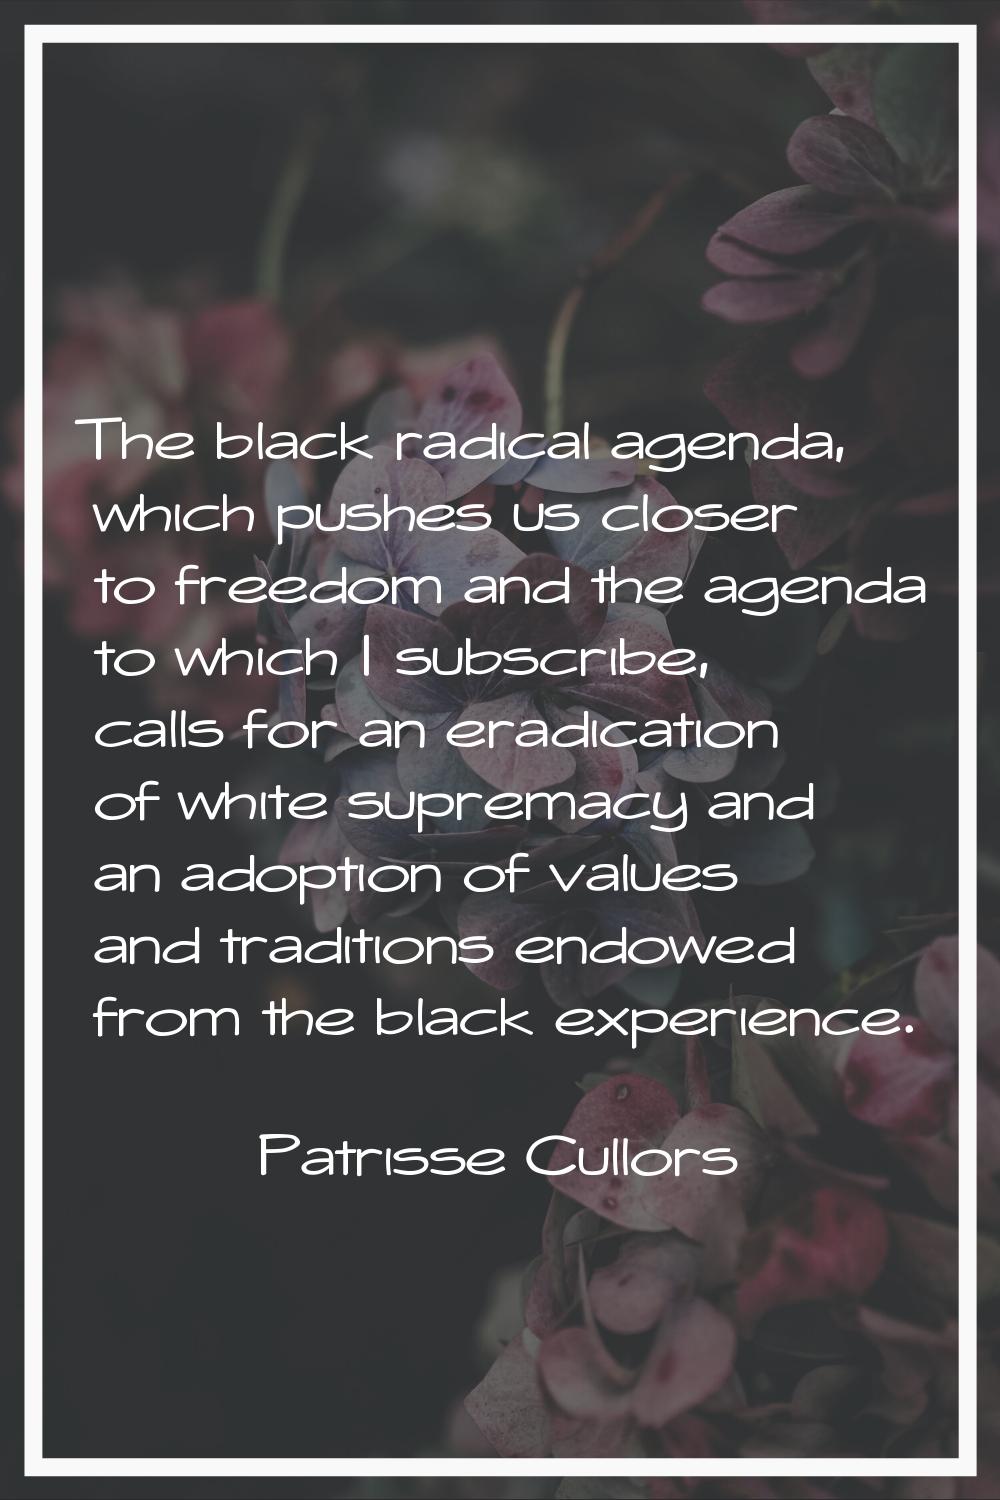 The black radical agenda, which pushes us closer to freedom and the agenda to which I subscribe, ca